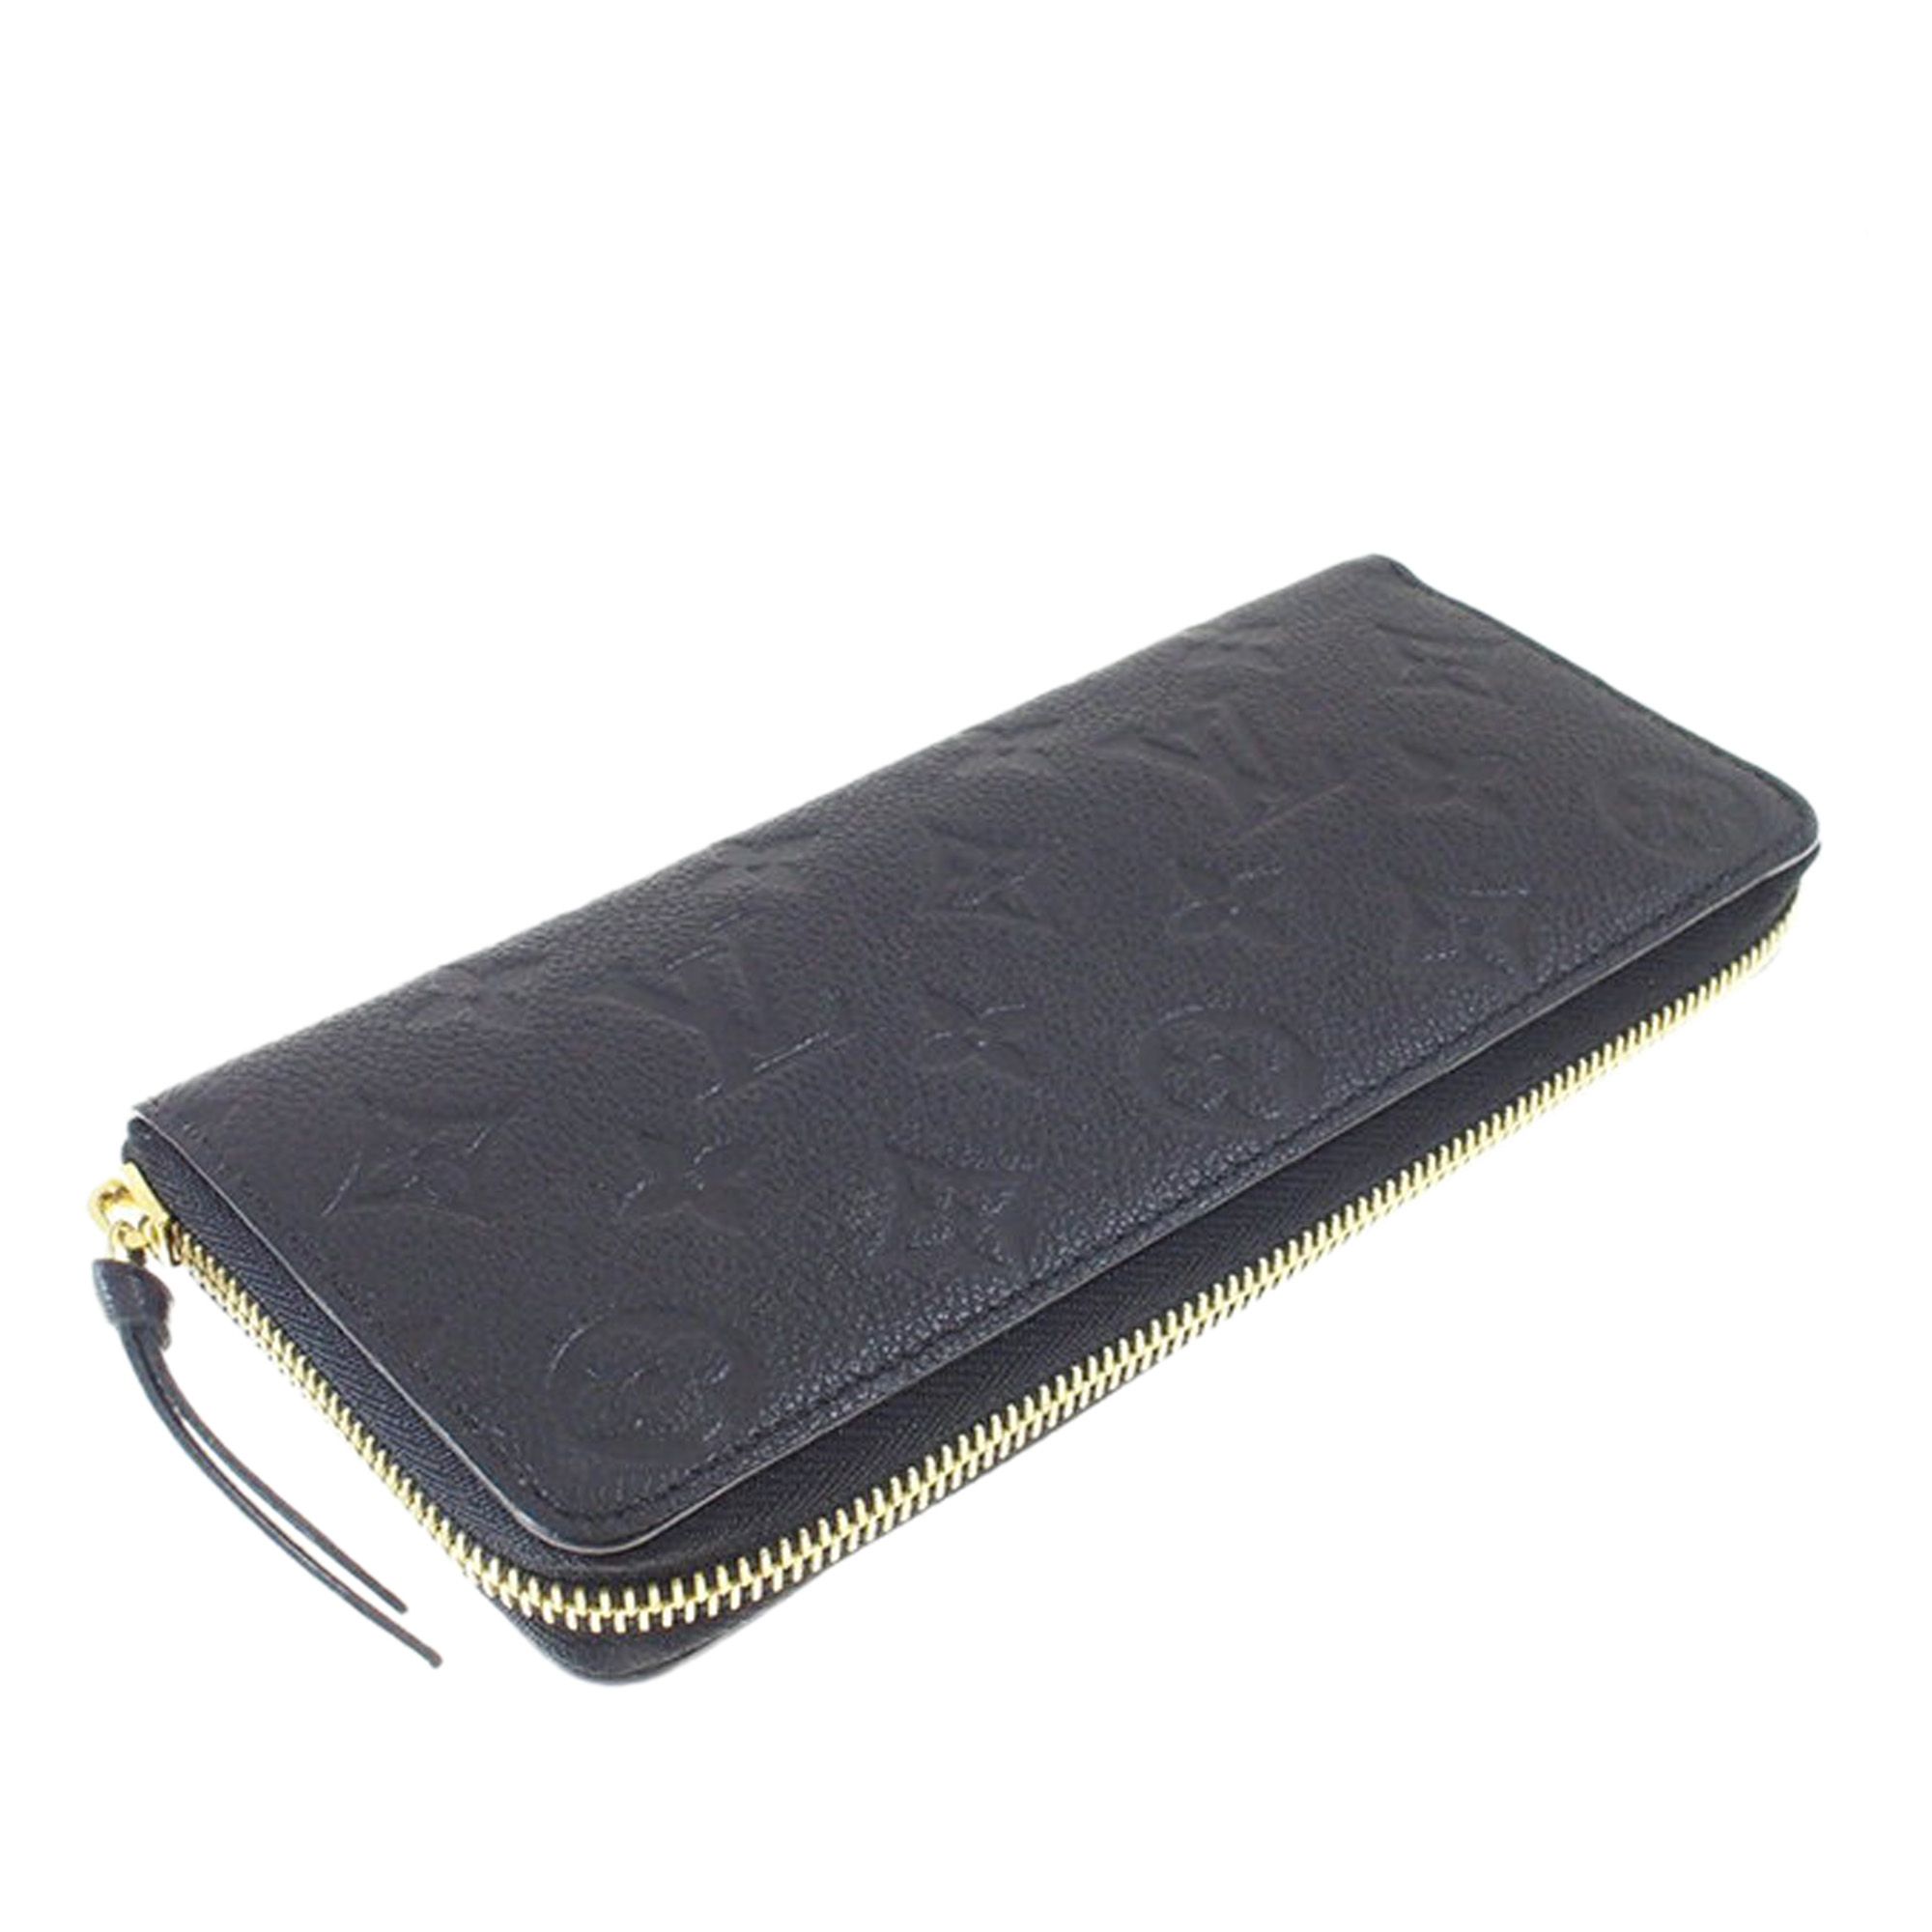 VINTAGE. RRP AS NEW. The Monogram Empreinte long wallet features a leather body, a zip around closure, and an interior zip and slip pockets.
Dimensions:
Length 10cm
Width 20cm
Depth 1cm

Original Accessories: Dust Bag

Color: Black
Material: Leather x Monogram Empreinte
Country of Origin: France
Boutique Reference: SSU104644K1342


Product Rating: GoodCondition